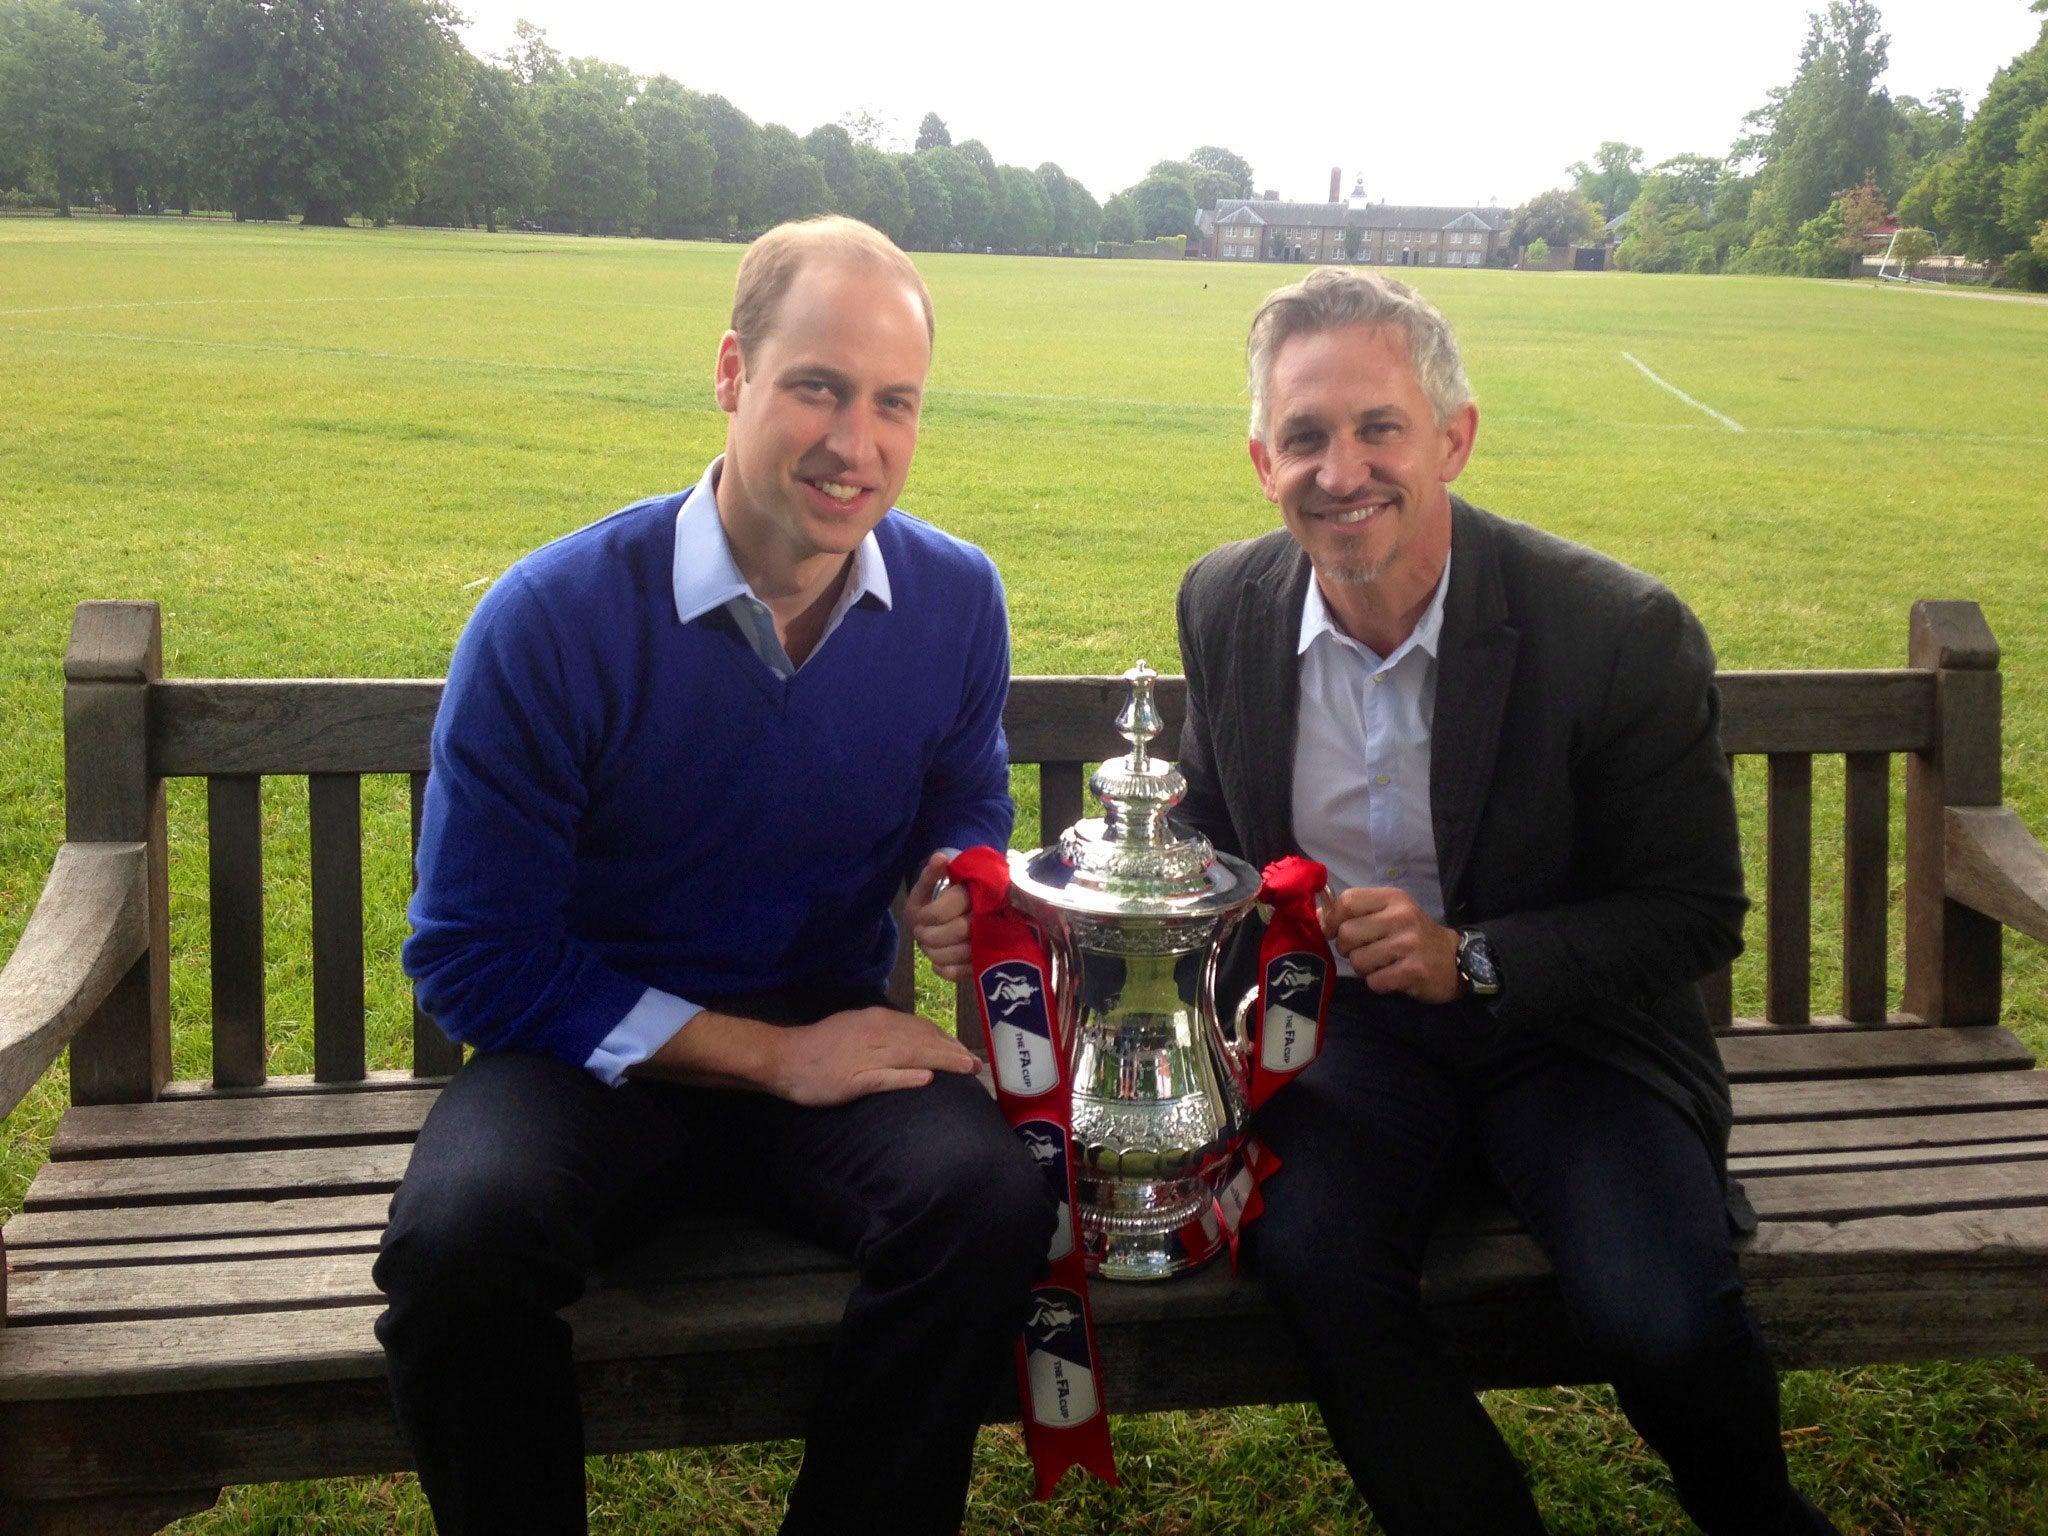 Duke of Cambridge being interviewed at Kensington Palace in London by Gary Lineker for the FA Cup Final on the BBC where he revealed he would "love" to attend football matches with his son Prince George in the near future, but he will have to "pass that b